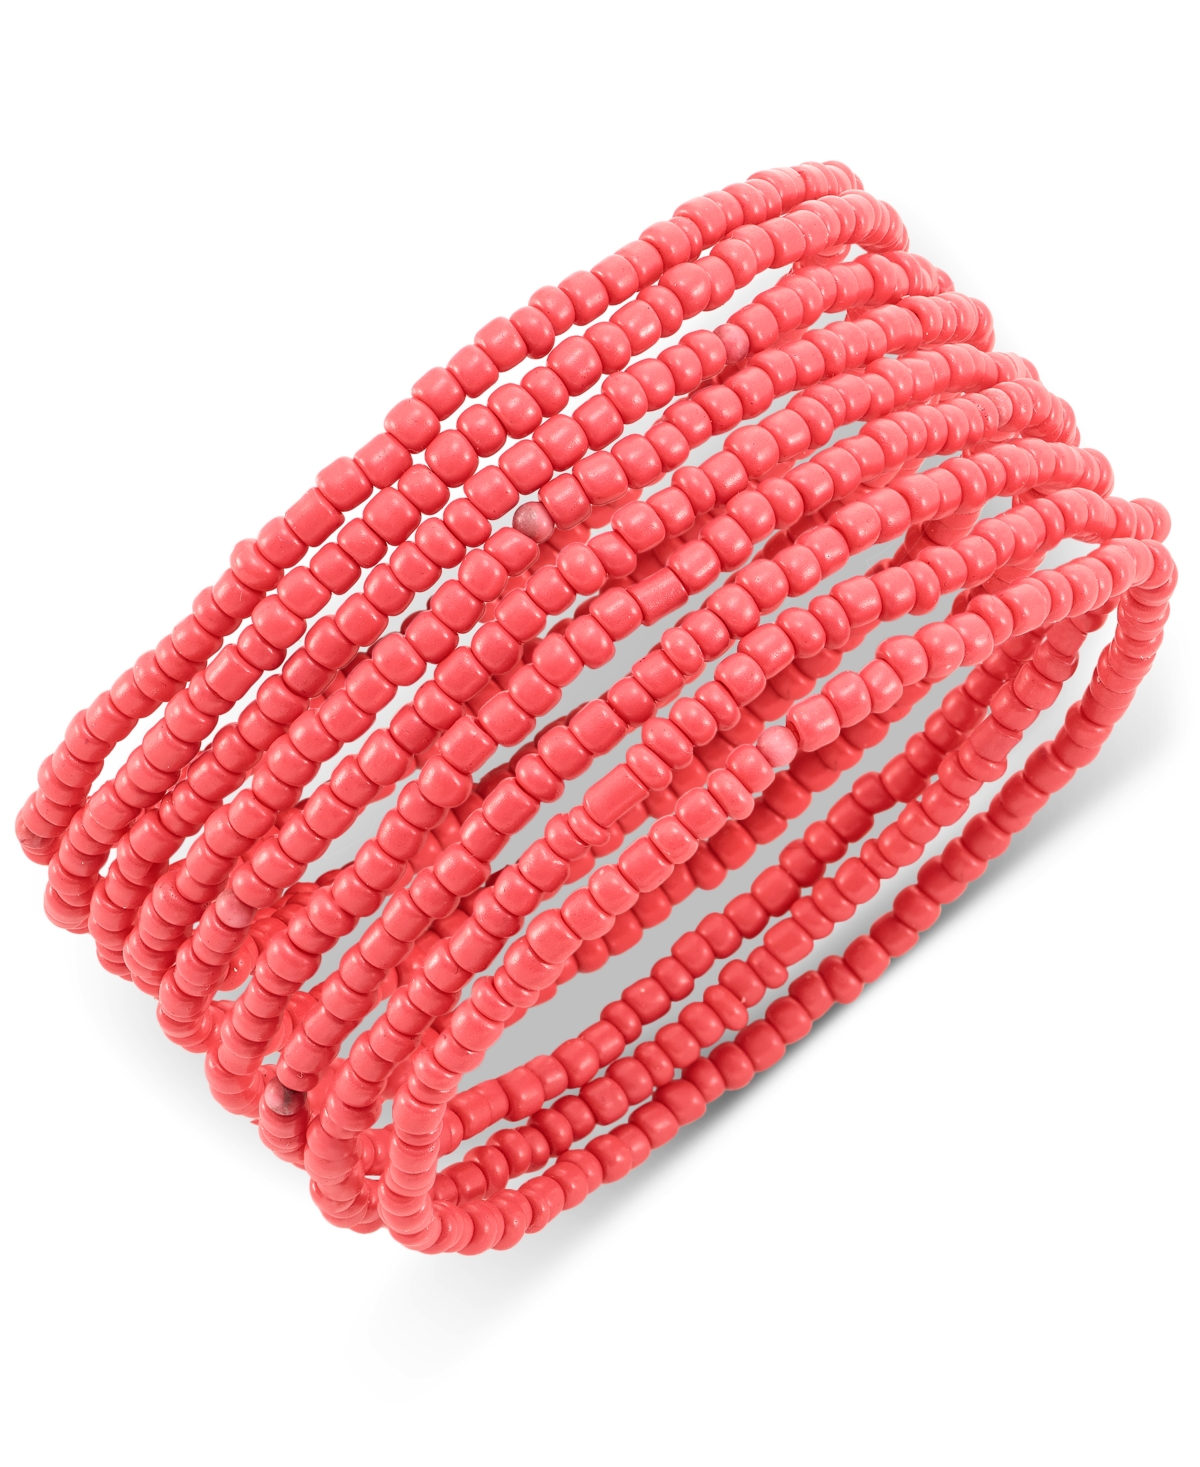 9-Pc. Color Seed Bead Stretch Bracelets, Created for Macy's - Coral